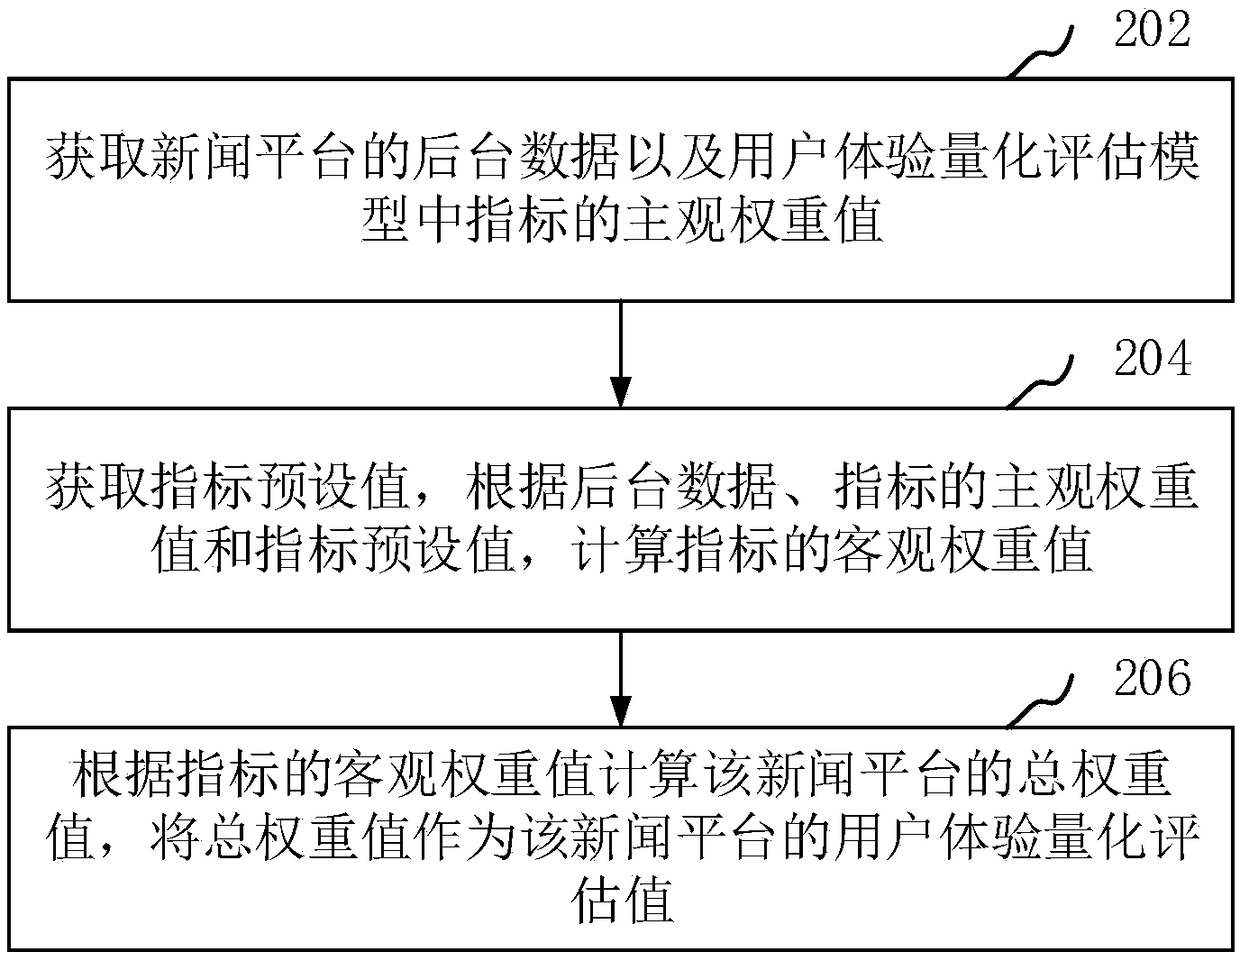 User experience quantitative evaluation value measuring method and device and computer equipment